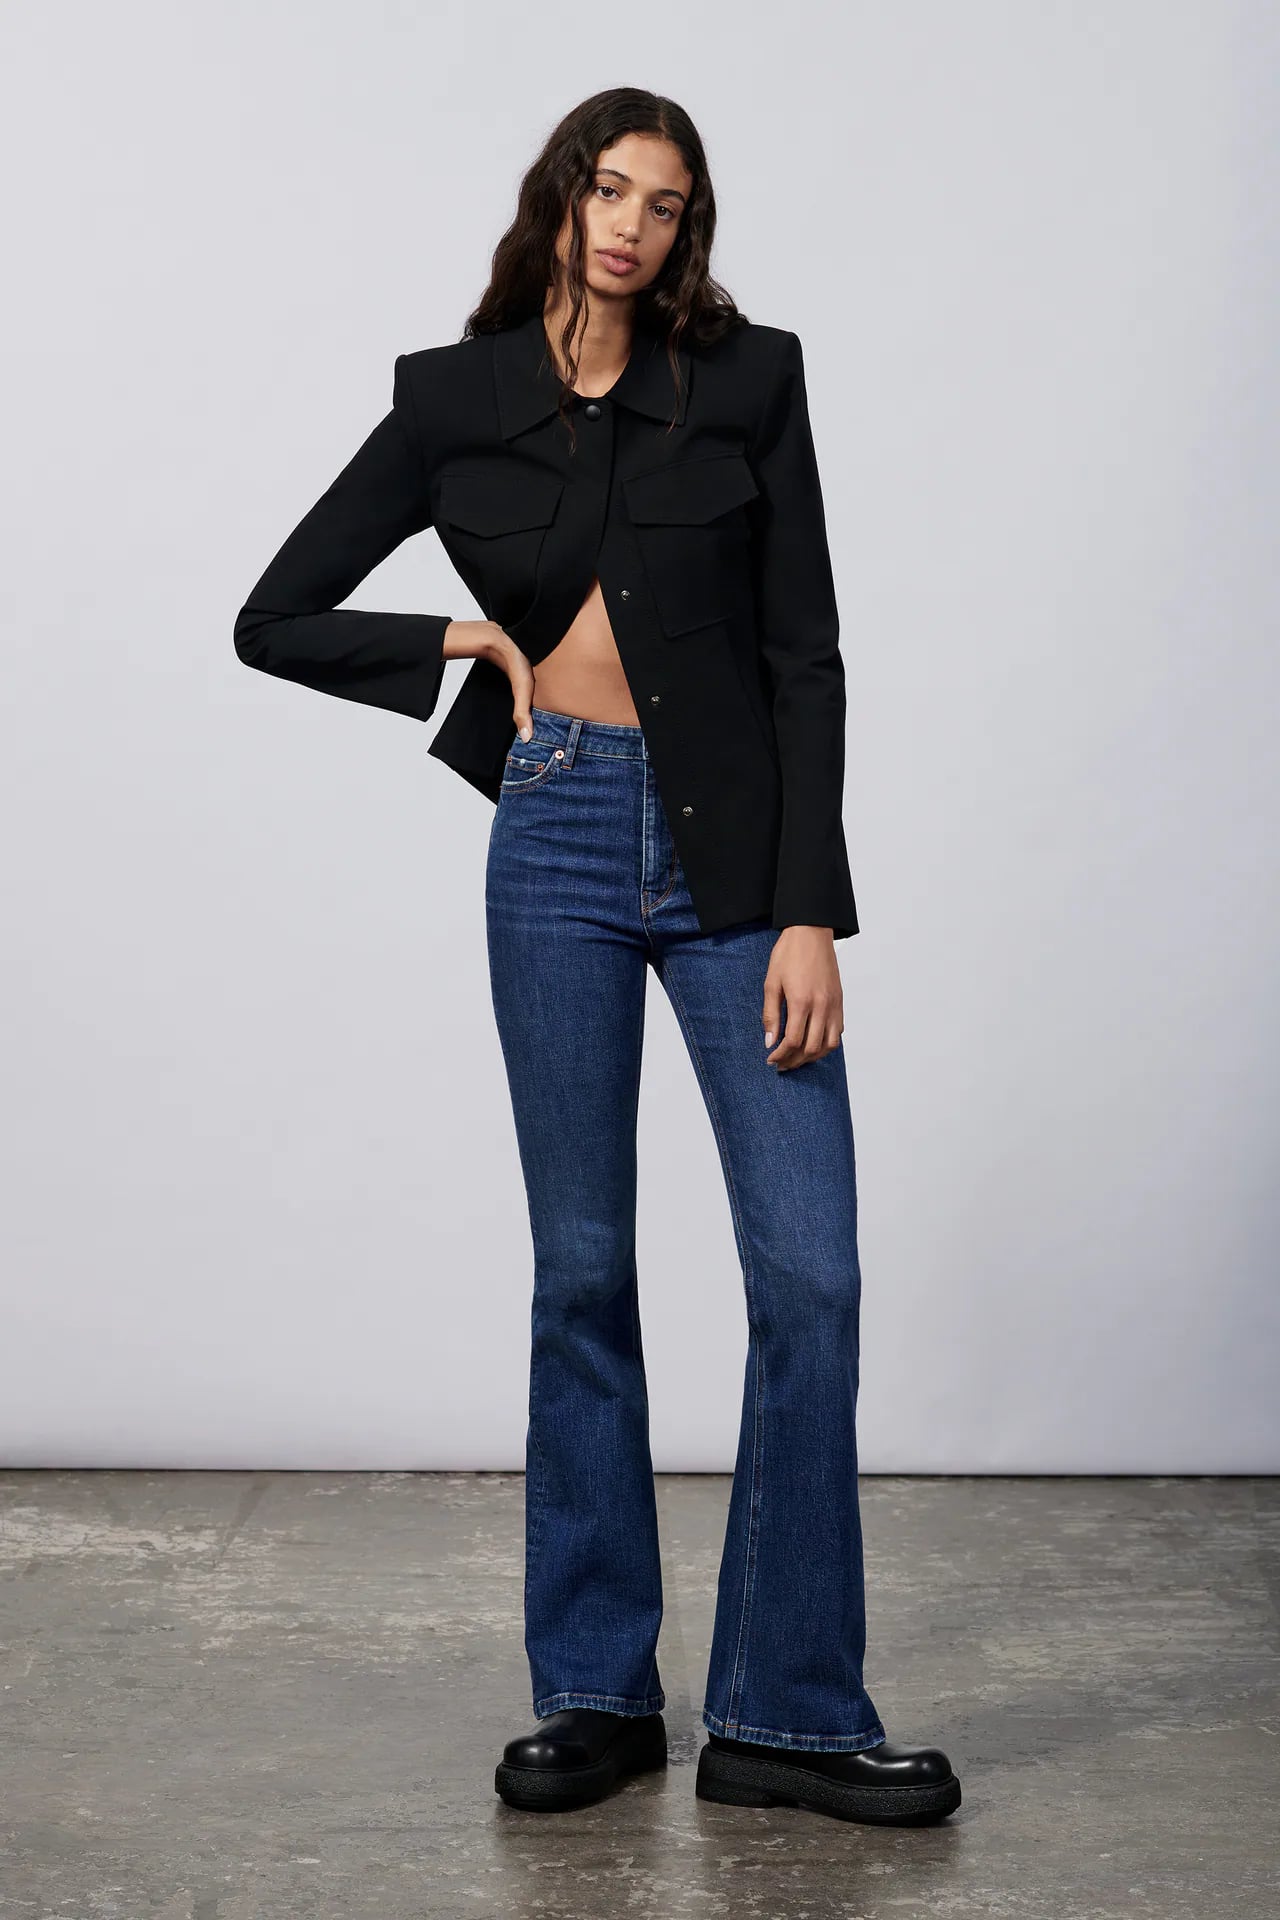 A Hybrid Jean: Zara ZW High Rise Slim Flare Jeans | Flare Jeans Worth Right Now, From Kick Flares Bell Bottoms | POPSUGAR Fashion Photo 11